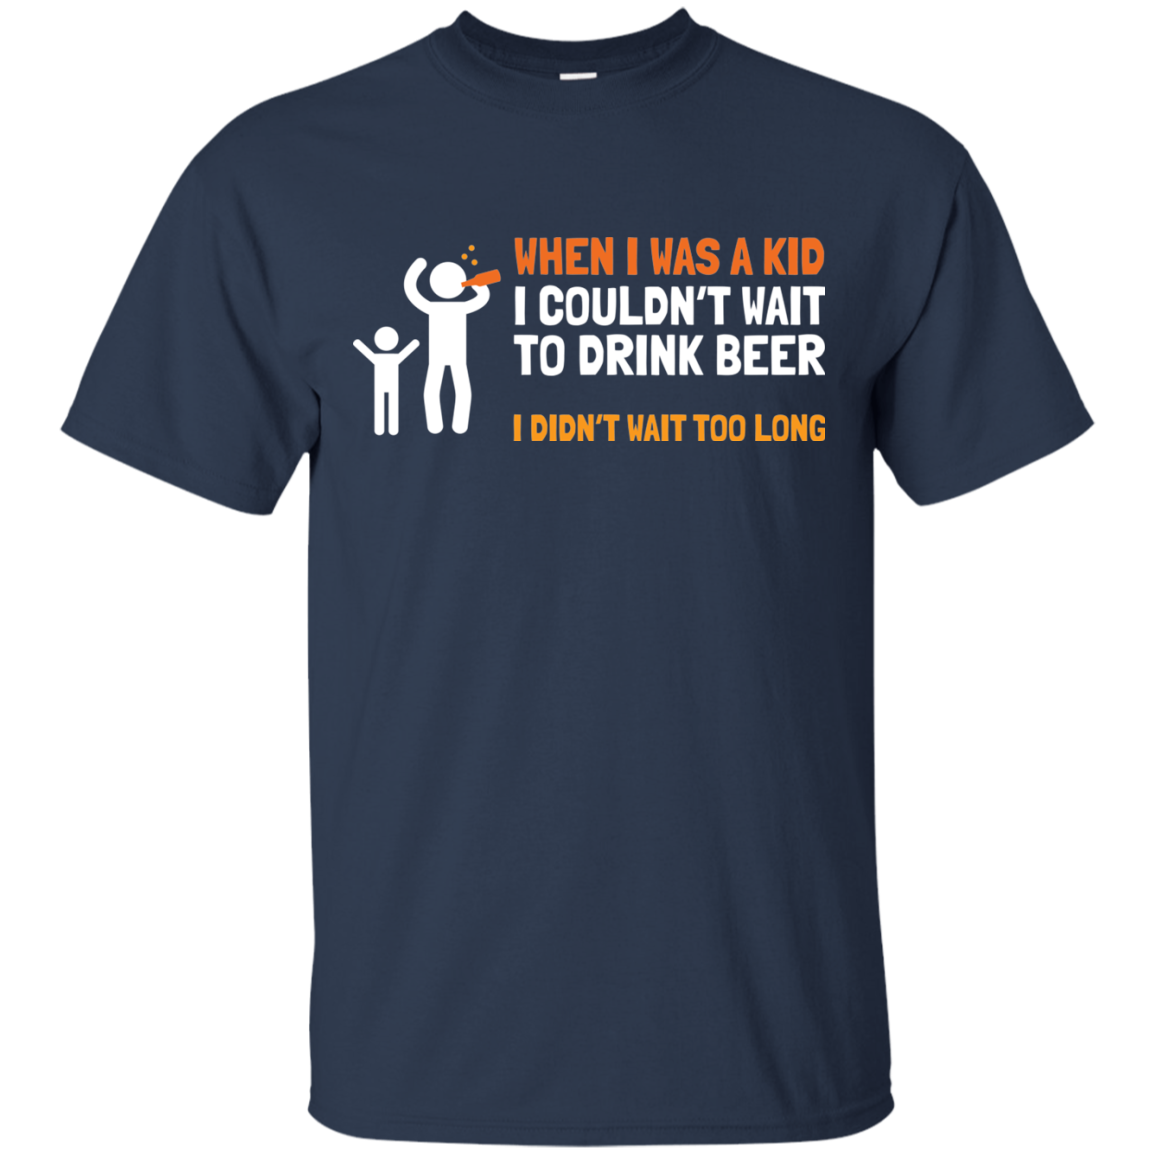 When I Was Kid, I couldn't Wait To Drink Beer T-Shirt Apparel - The Beer Lodge